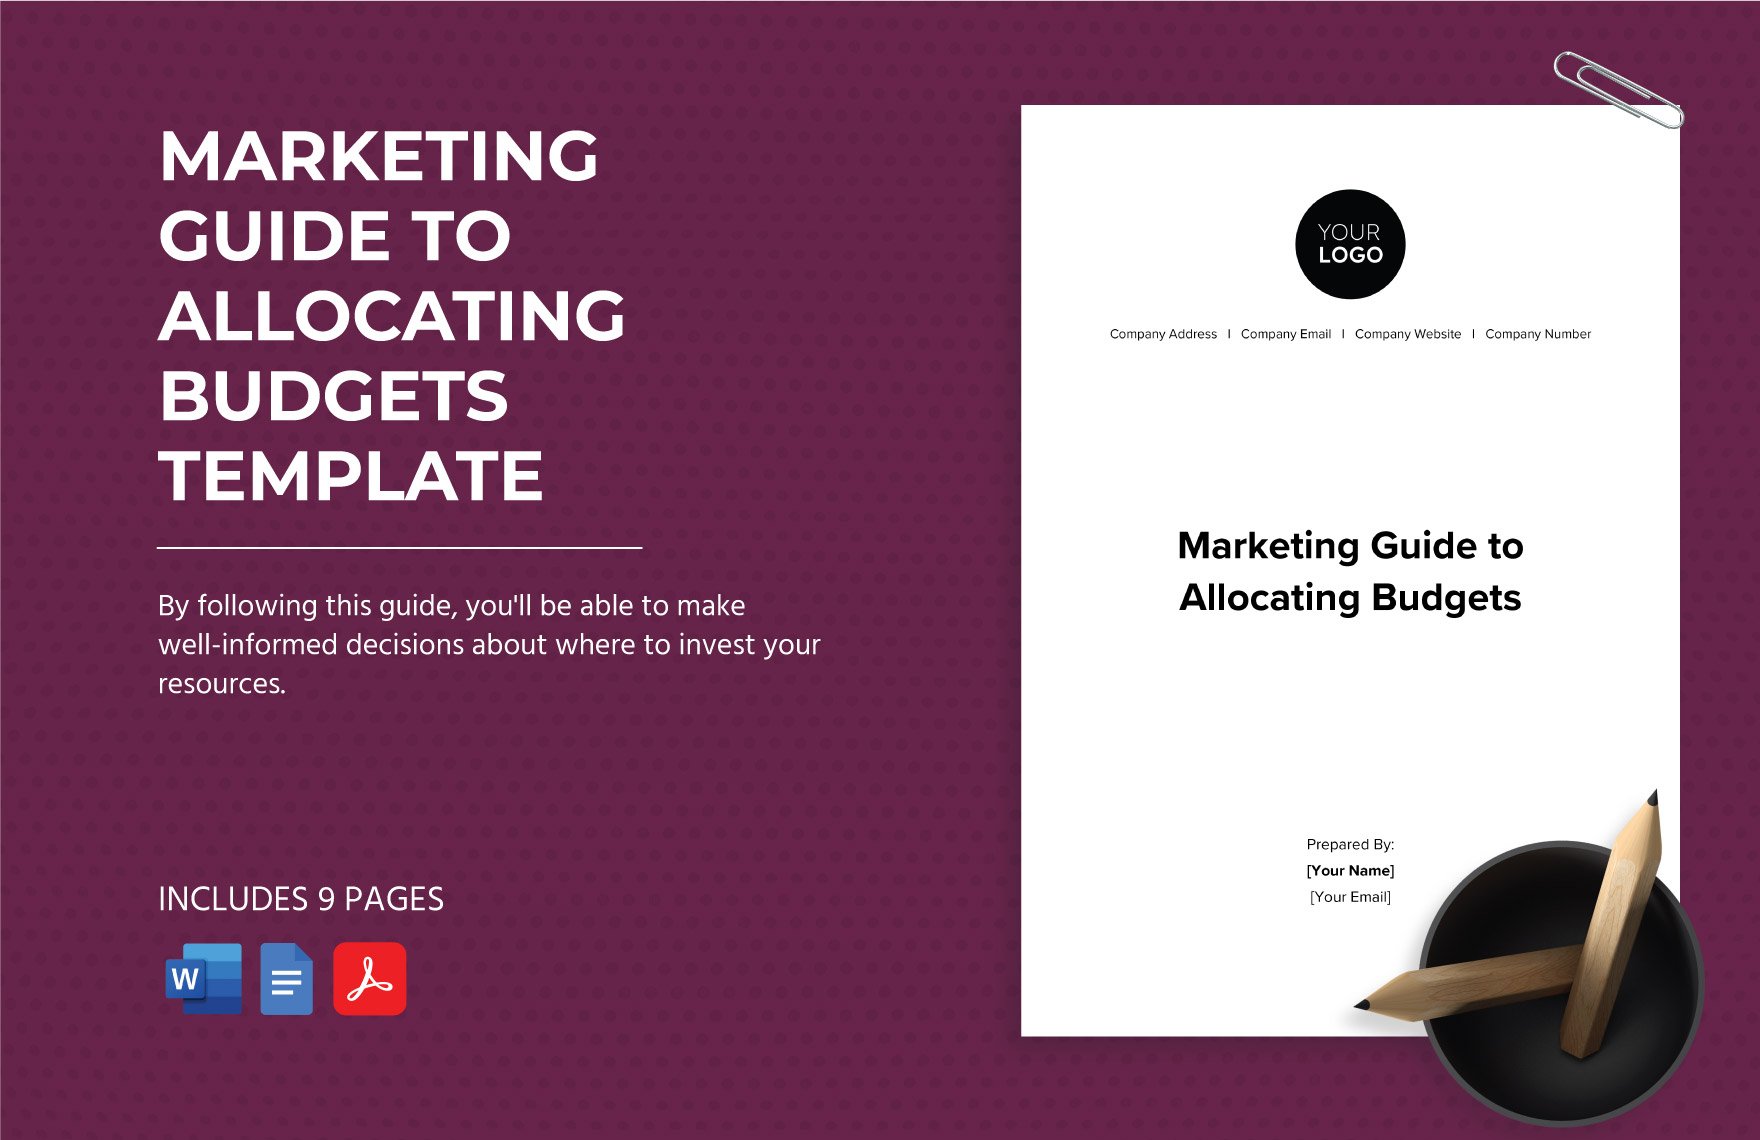 Marketing Guide to Allocating Budgets Template